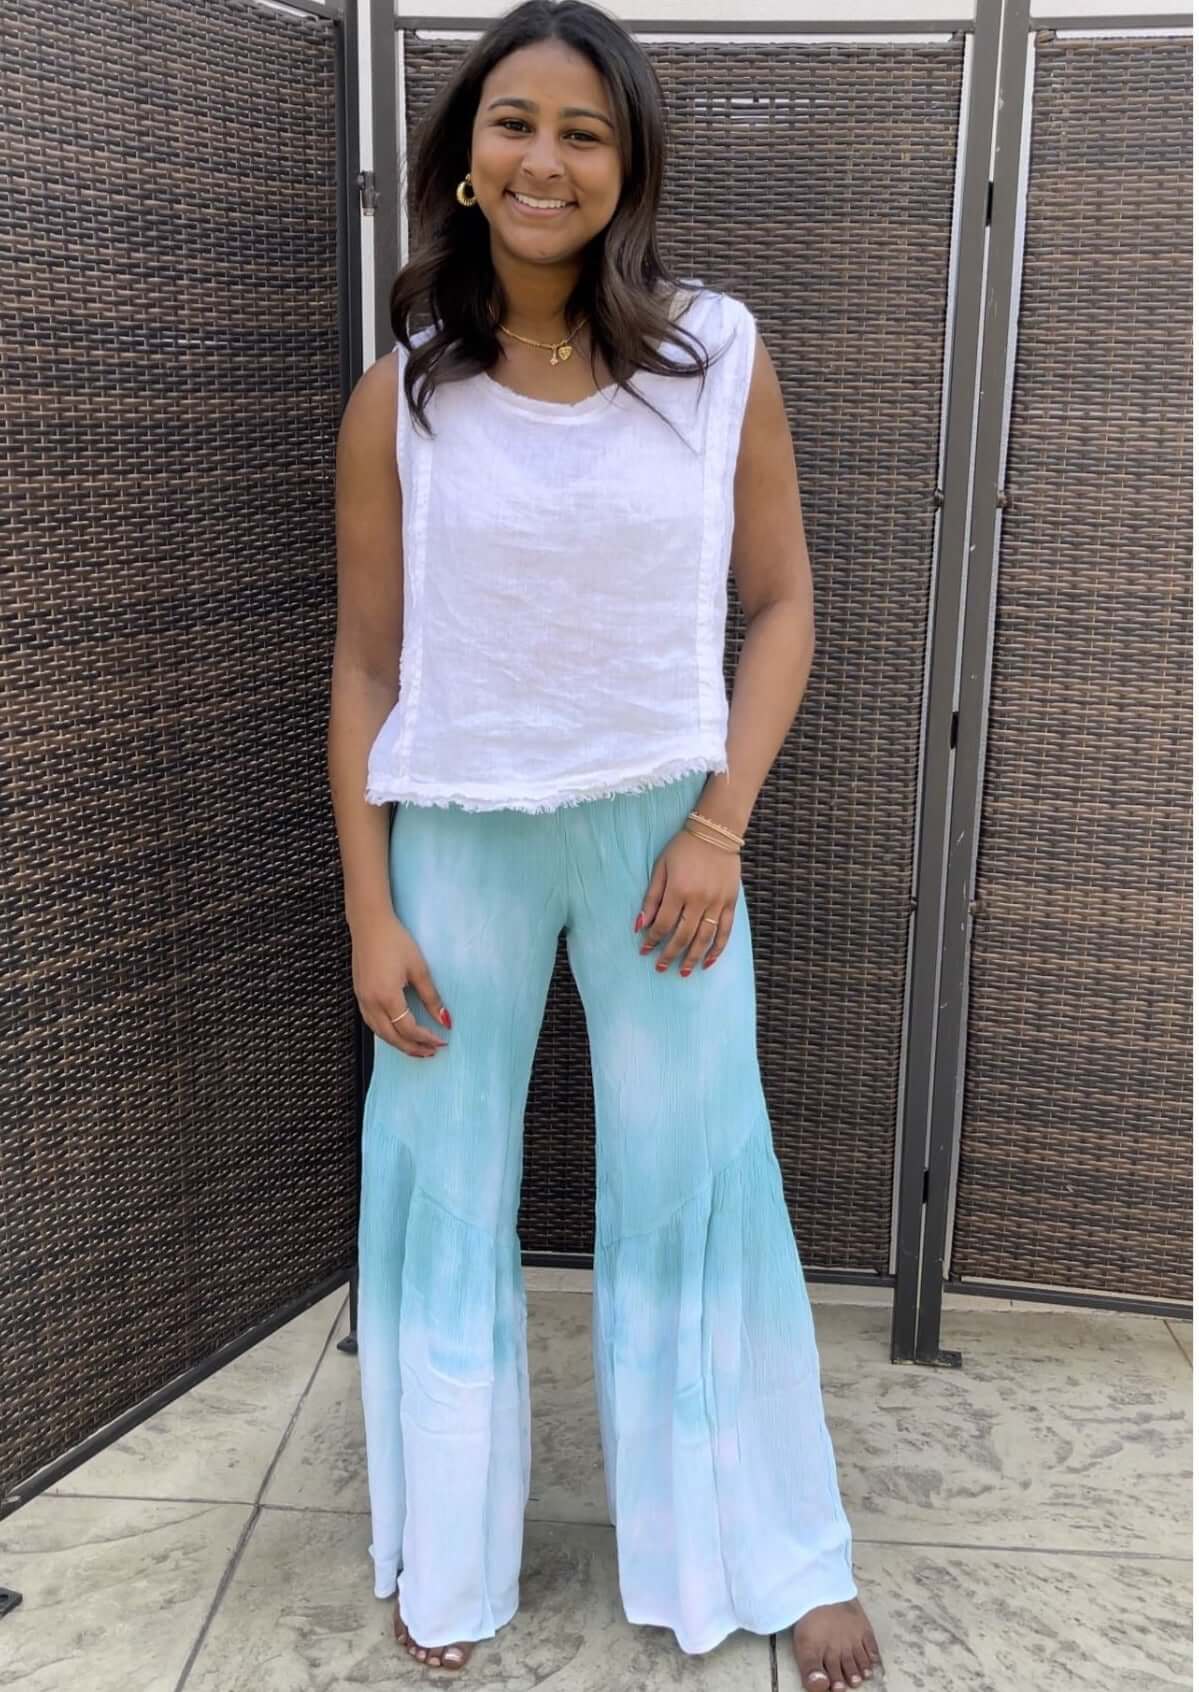 USA Made Ladies Turquoise & White Rayon Gauze Relaxed Fit Tie Dye Wide Leg Palazzo Pants with Flounce Hem | Classy Cozy Cool Women's American Boutique